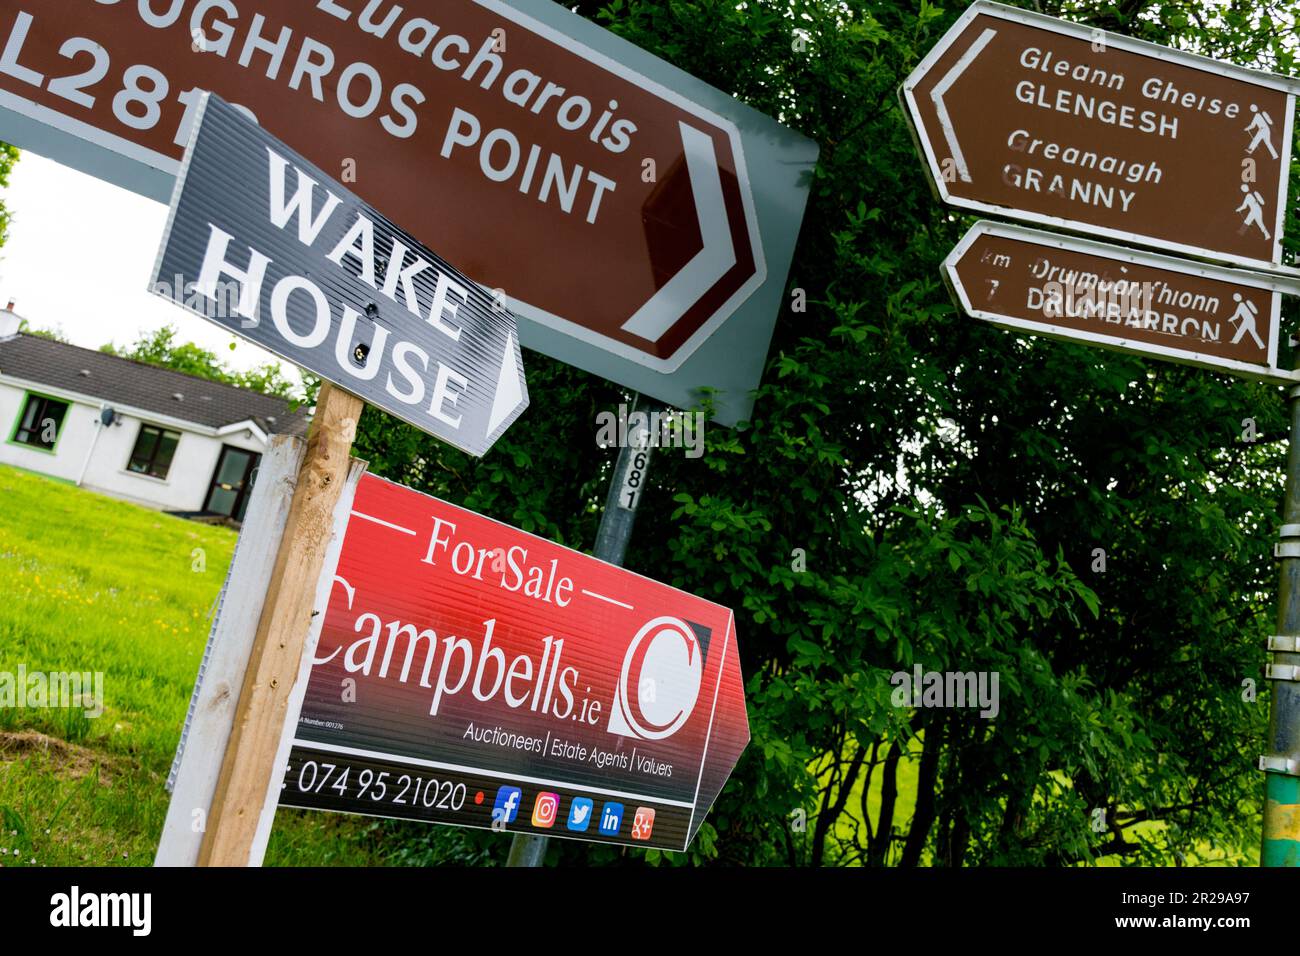 Wake House sign amongst other road signage in Ardara, County Donegal, Ireland Stock Photo